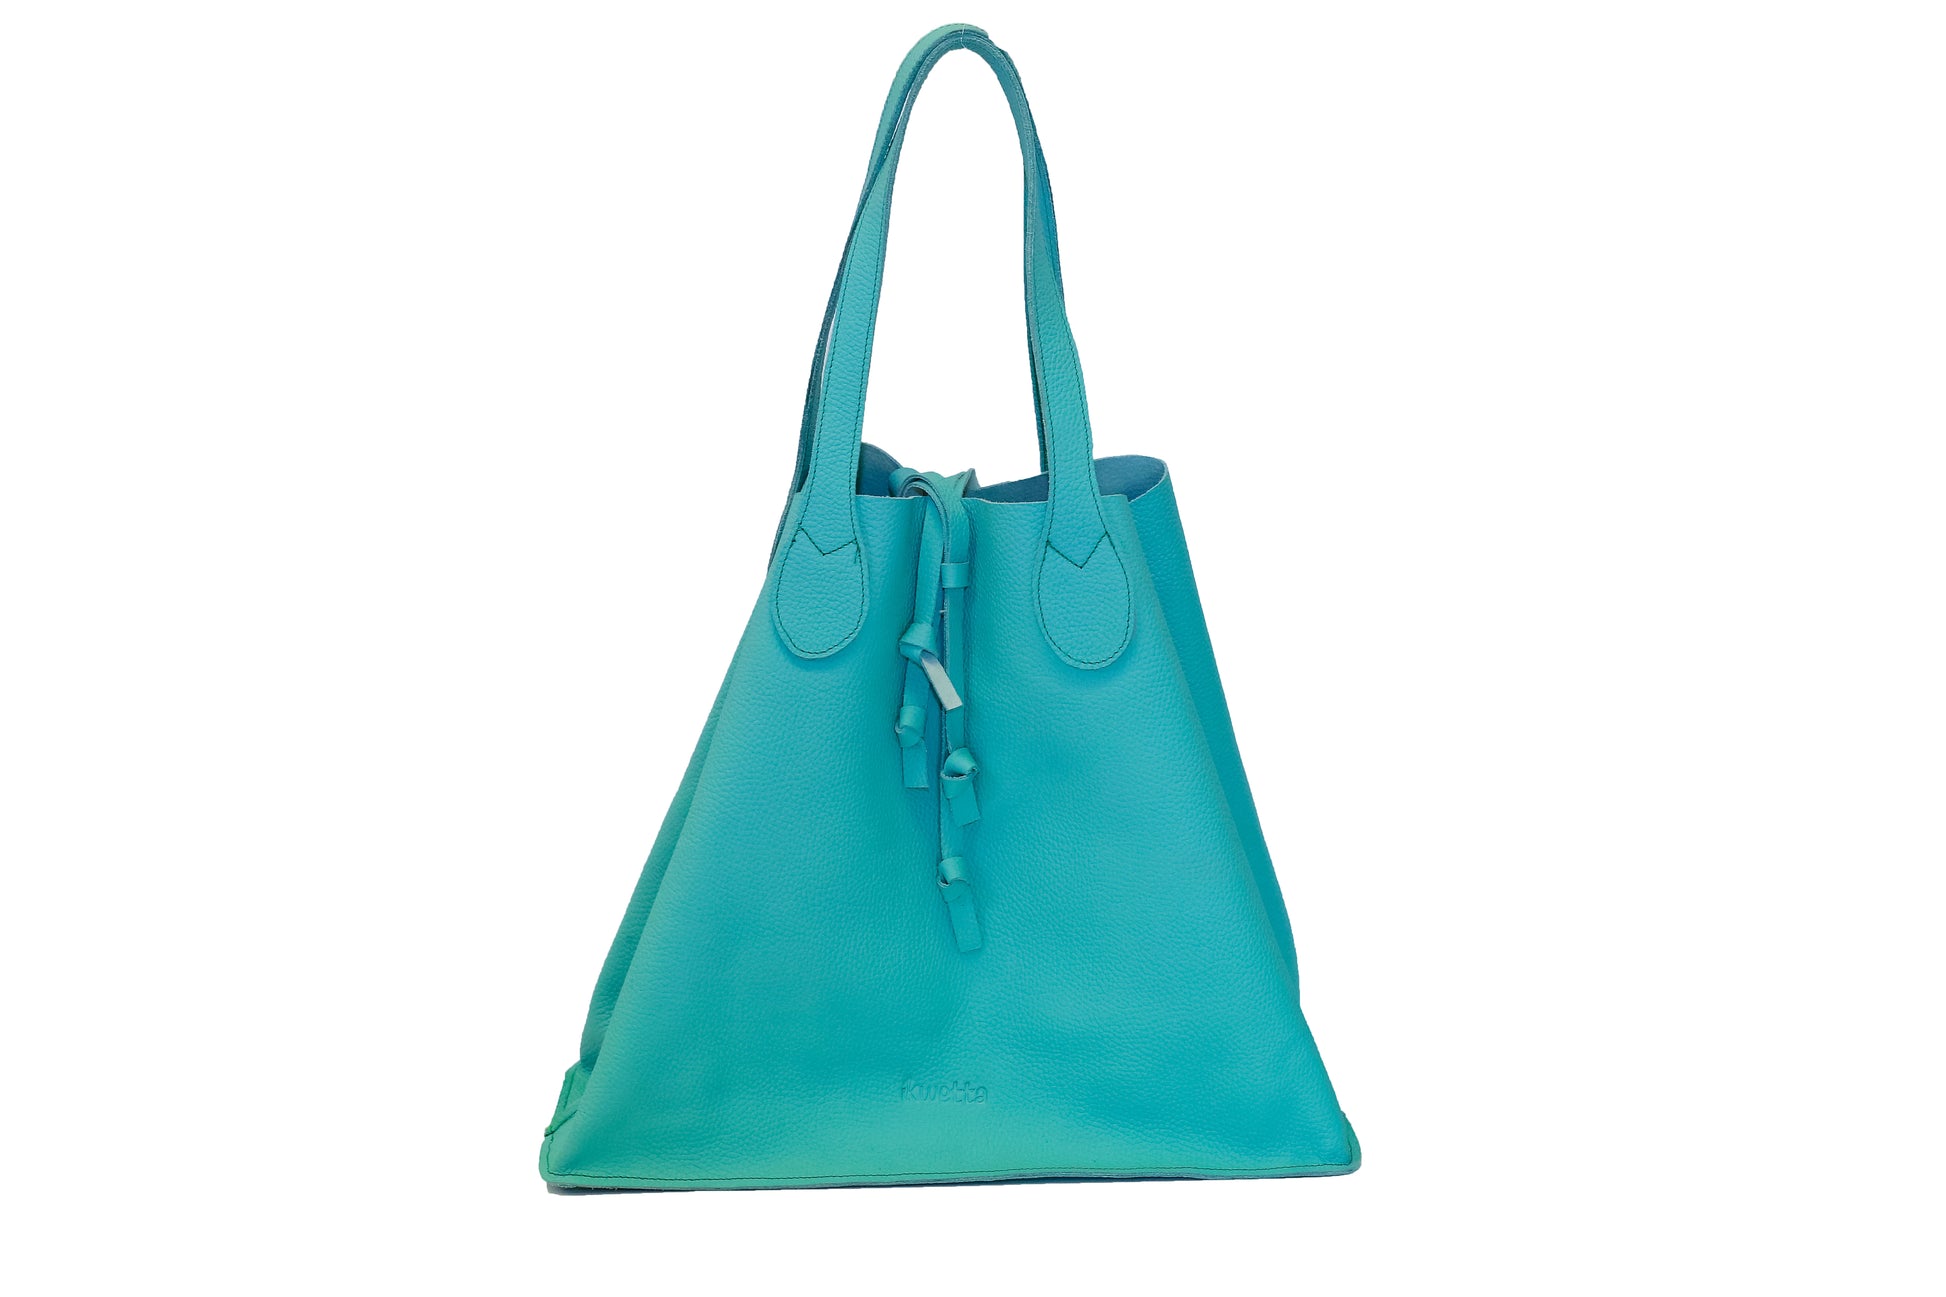 Francesca tote in Turquoise milled leather